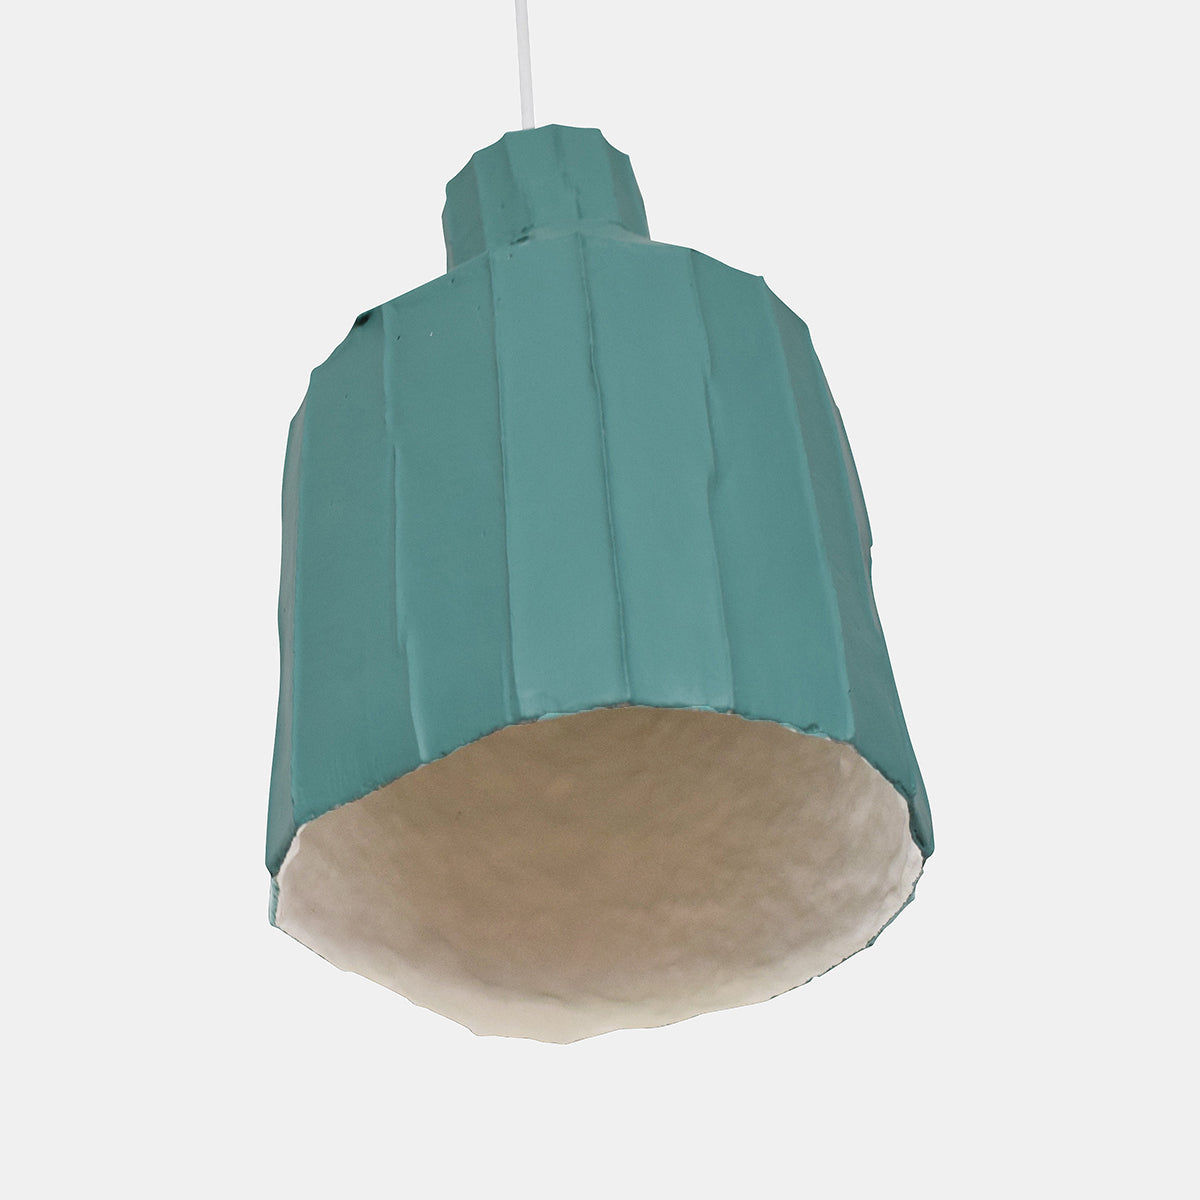 Teal Cylinder Paper Clay Pendant